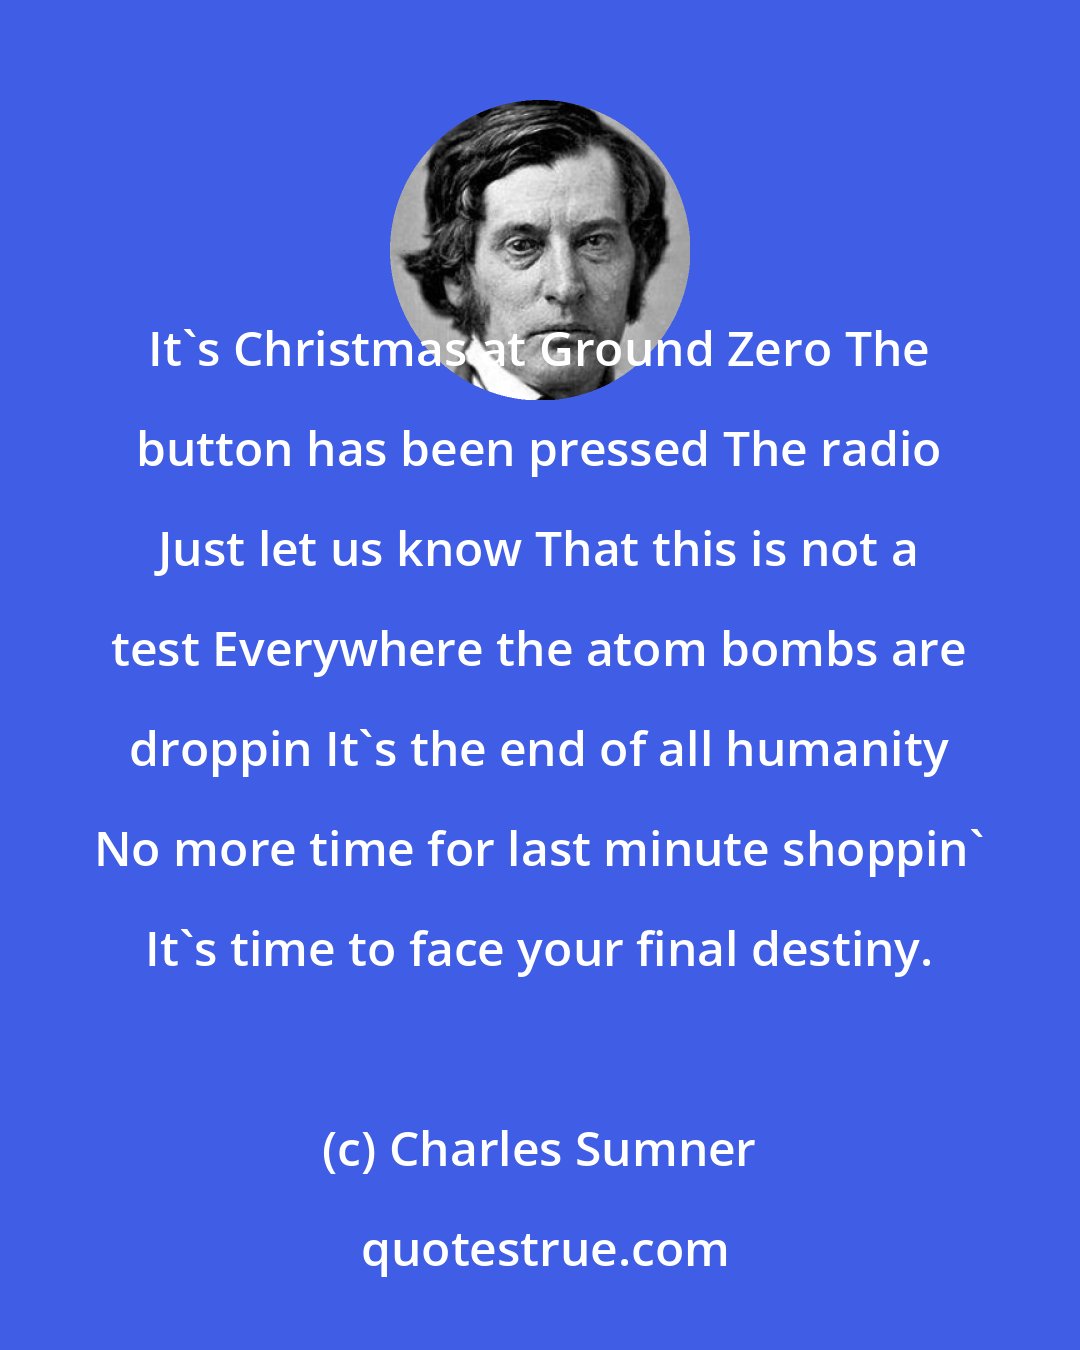 Charles Sumner: It's Christmas at Ground Zero The button has been pressed The radio Just let us know That this is not a test Everywhere the atom bombs are droppin It's the end of all humanity No more time for last minute shoppin' It's time to face your final destiny.